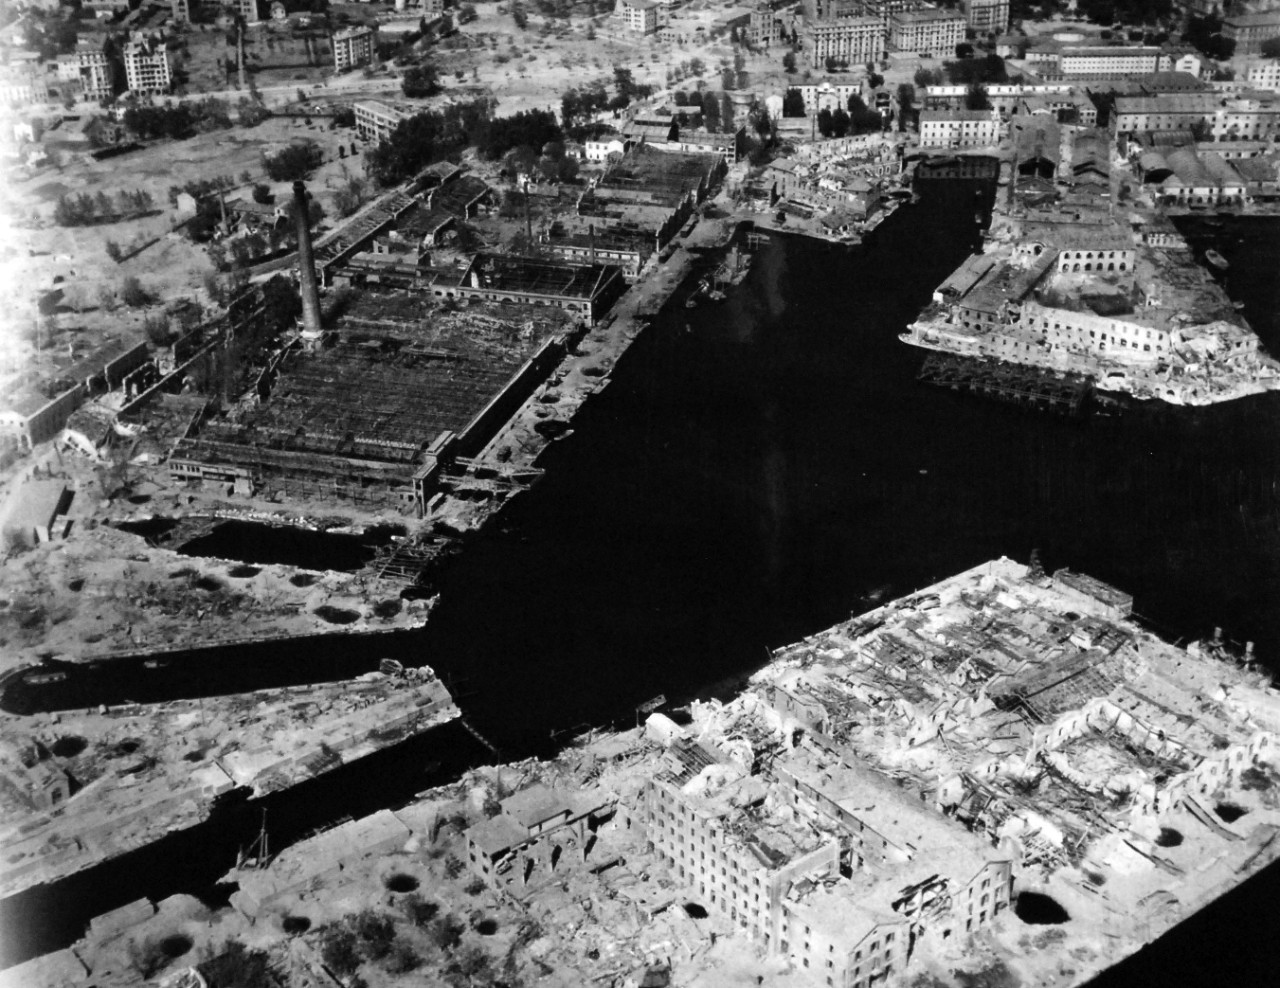 80-G-364007:  Invasion of Southern France, Toulon, August 1944.   Aerial view of the destruction to the harbor and installations at Toulon, France.  Taken by crew of USS Catoctin   (AGC 5).  Photograph received on 2 April 1946.   Official U.S. Navy Photograph, now in the collections of the National Archives.  (2014/7/10).